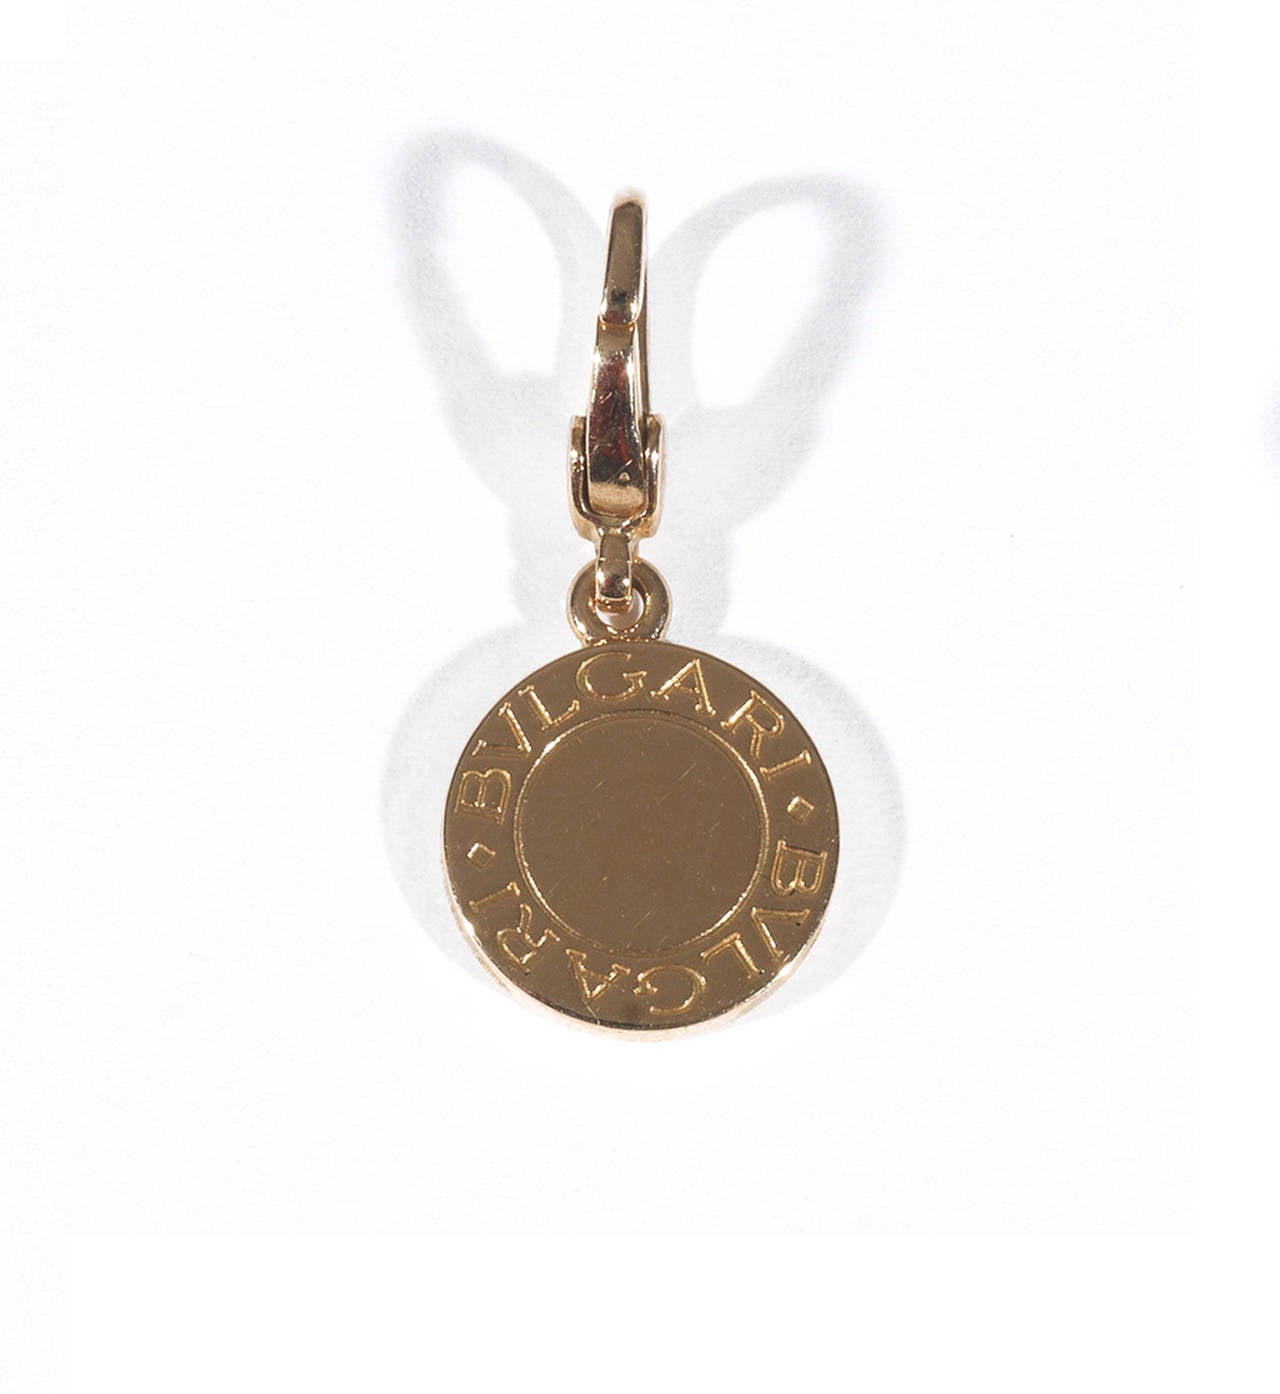 PLEASE NOTE: OUR PRICE IS FULLY INCLUSIVE OF SHIPPING, IMPORTATION TAXES & DUTIES

The round pendant centrally pave set with brilliant cut diamonds on one side and the inscription Bulgari on both sides

Mounted in 18Kt yellow gold

Signed